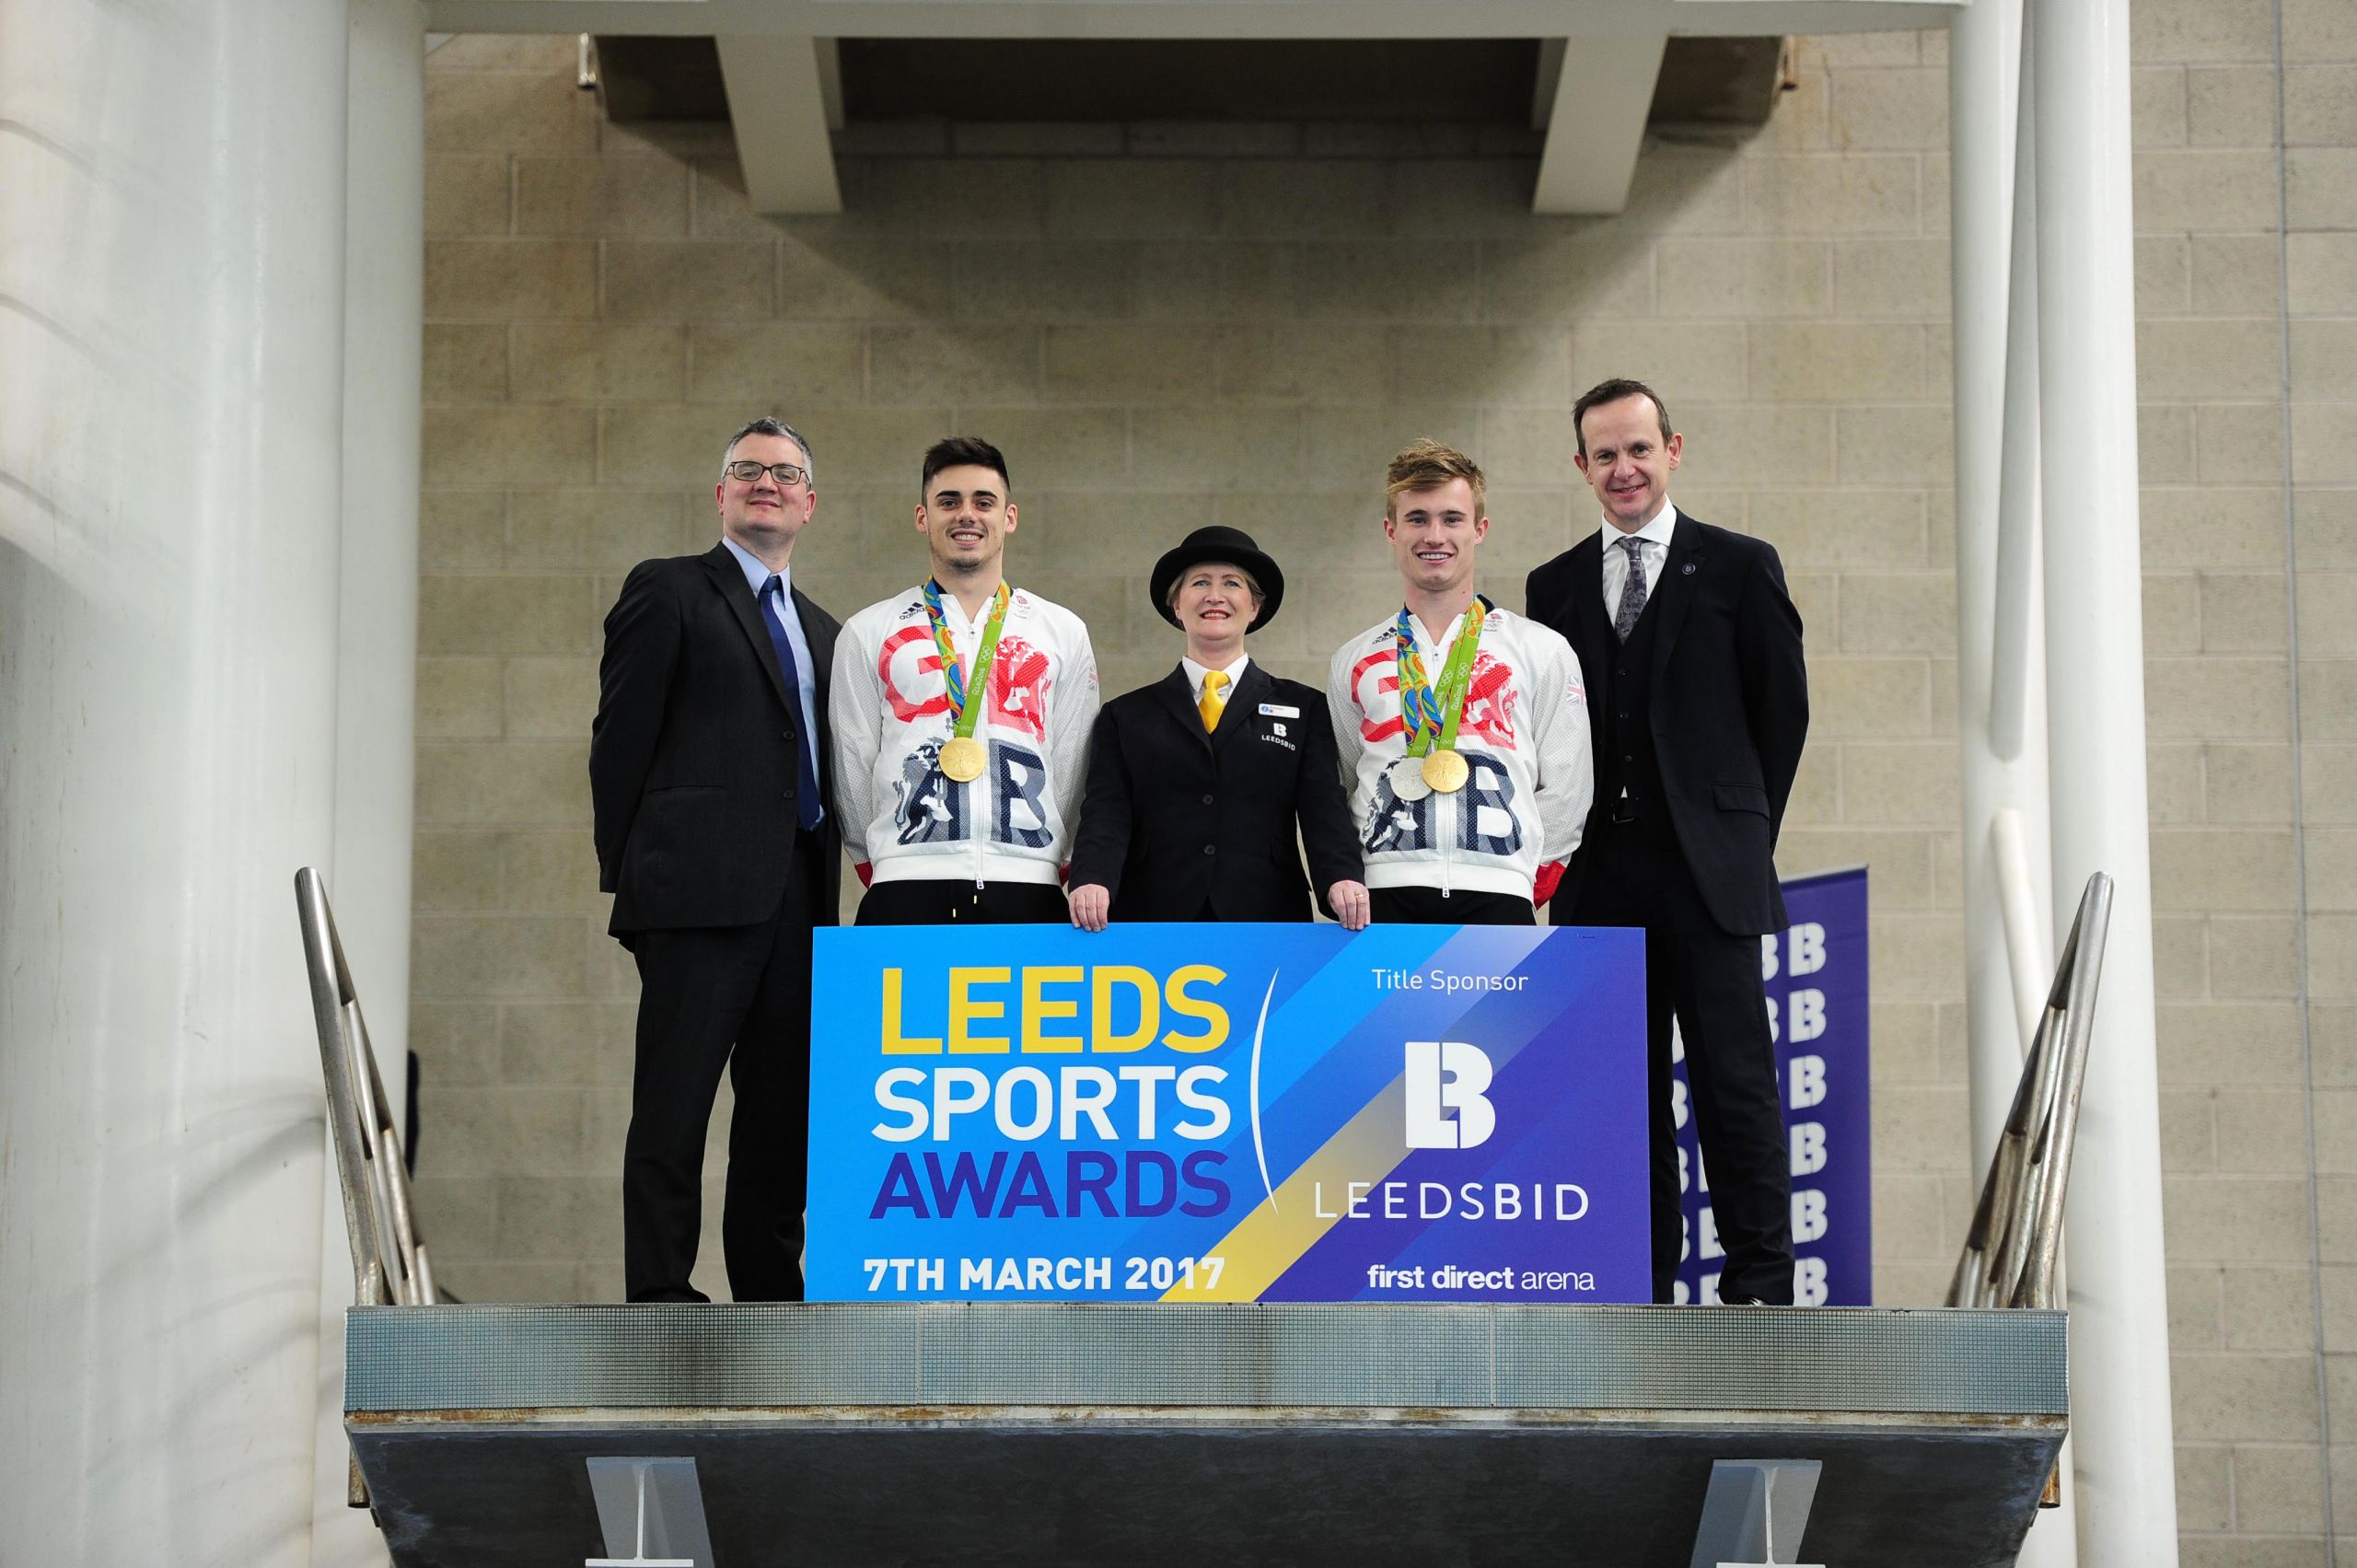 Award Titles for Sports Awesome Leedsbid is 2017 Leeds Sports Awards Title Sponsor – north